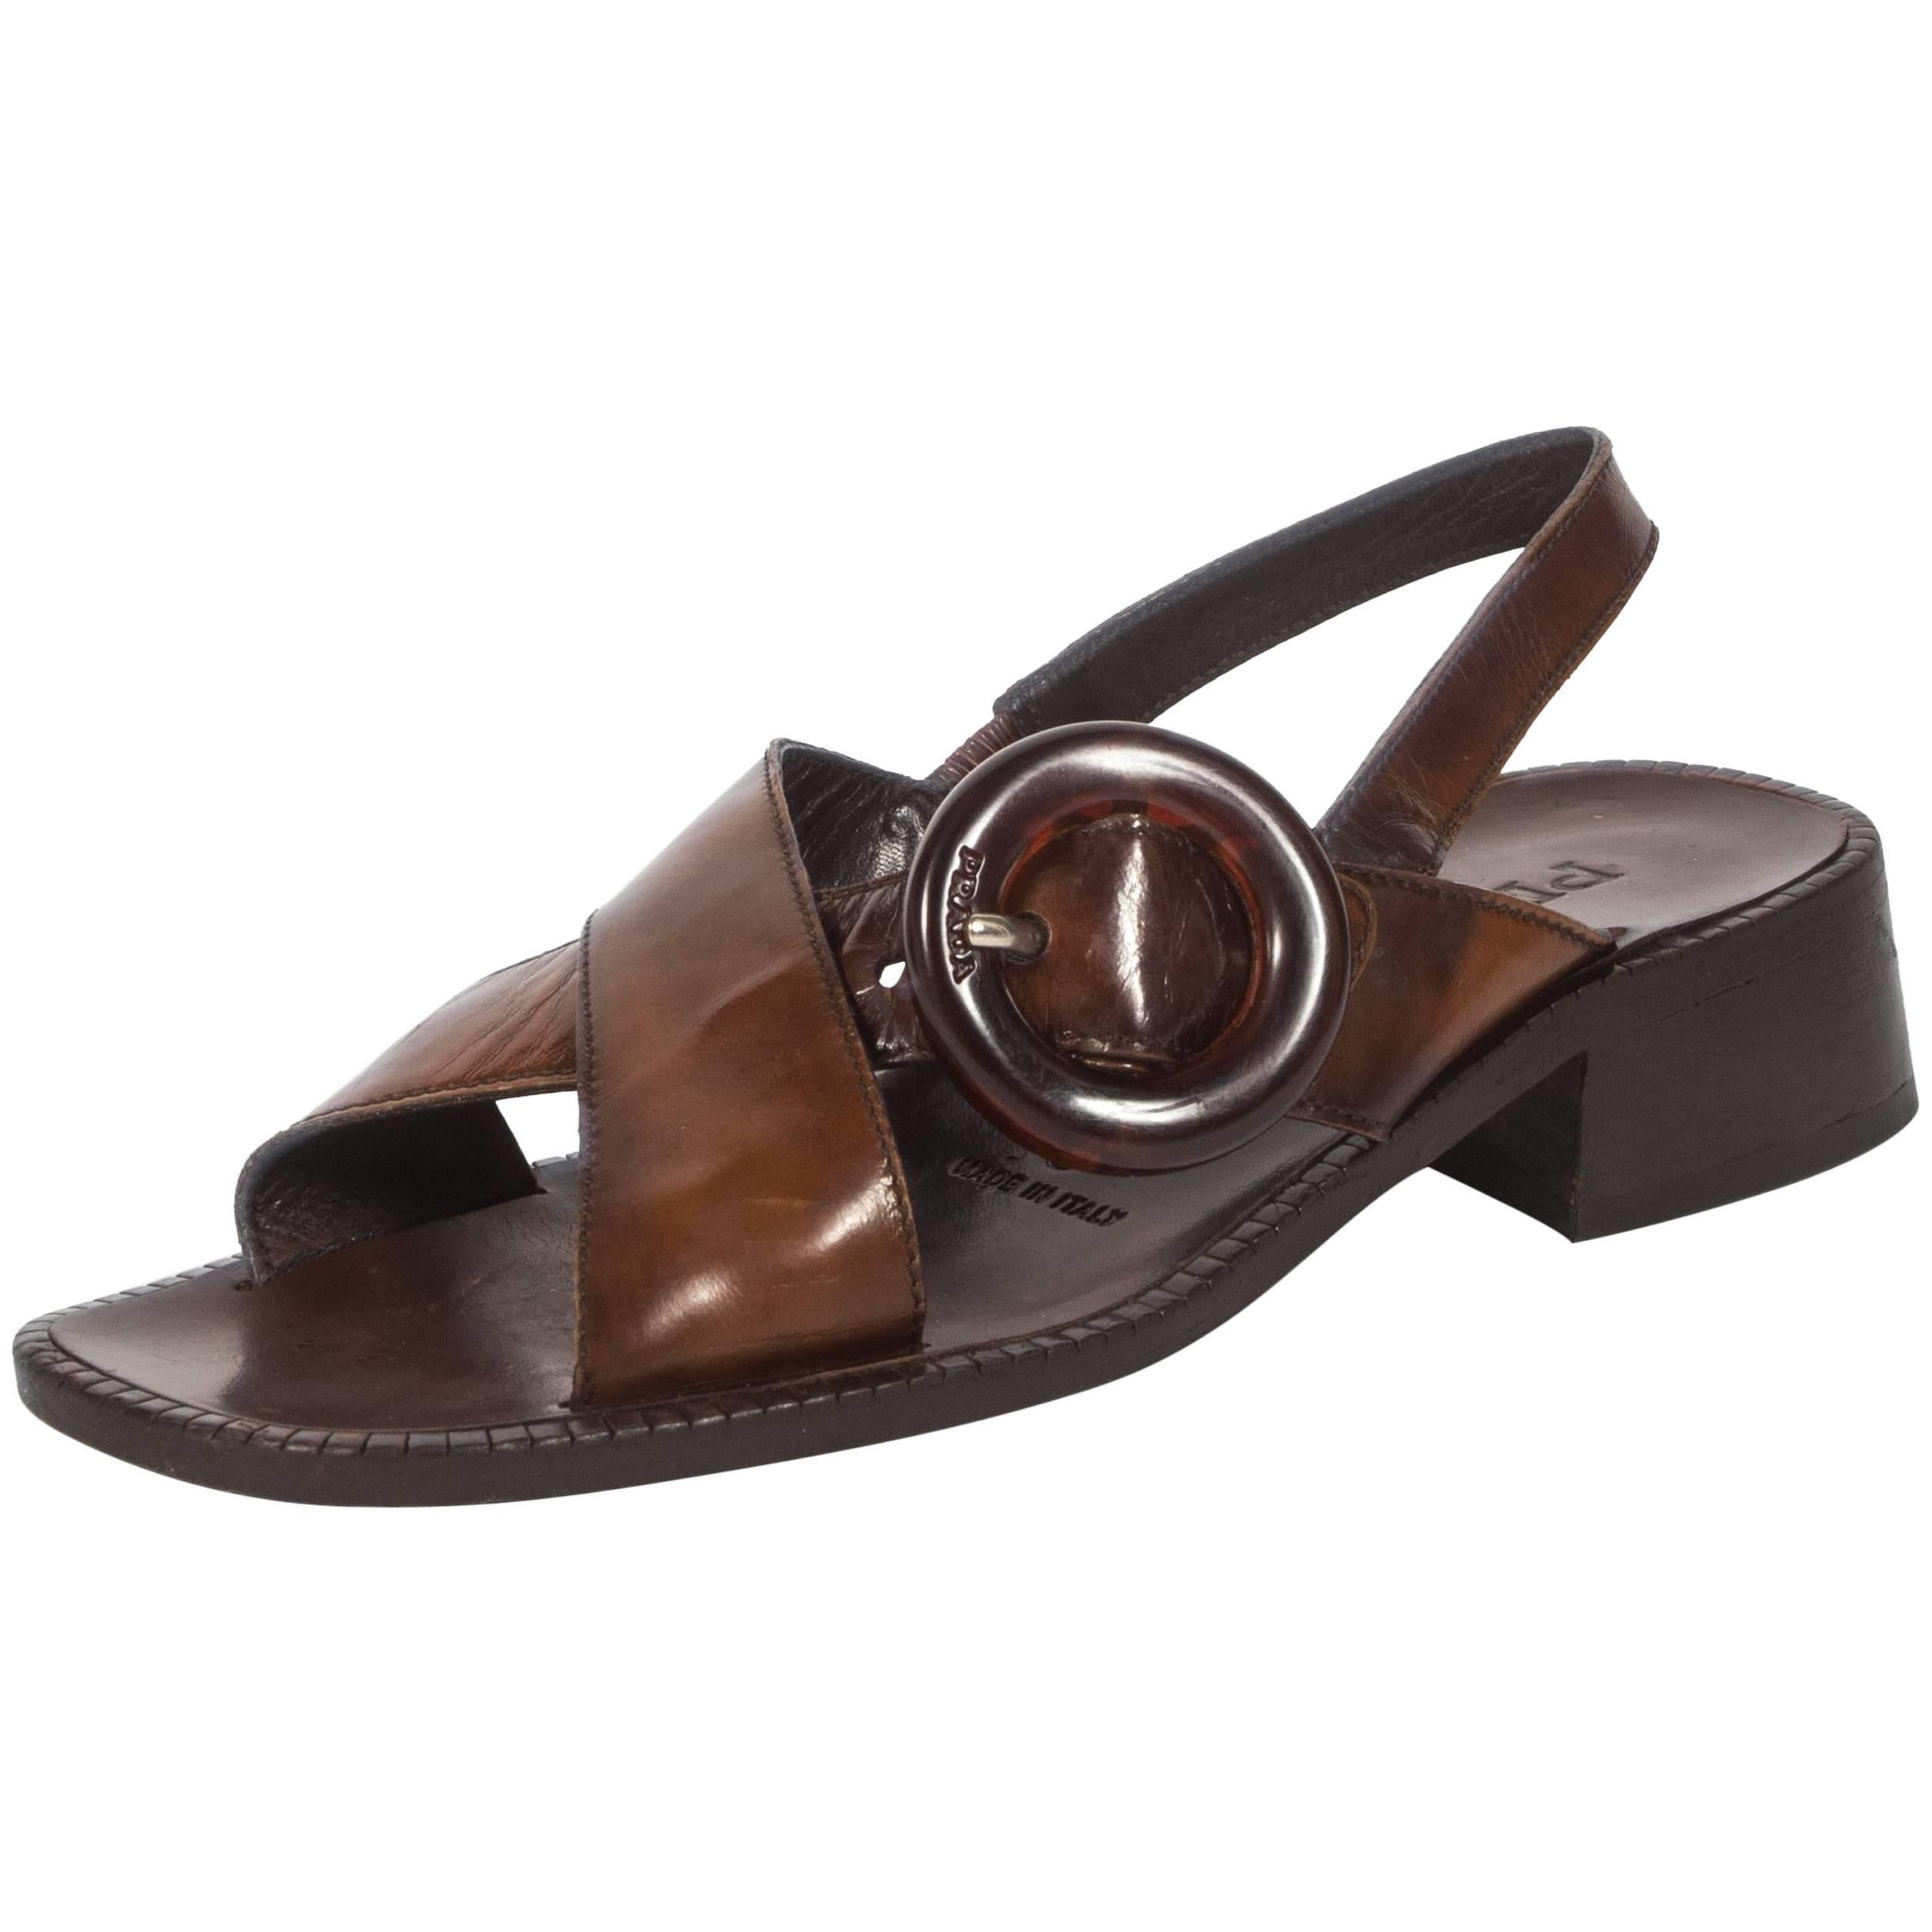 Prada brown leather sandals with buckle 